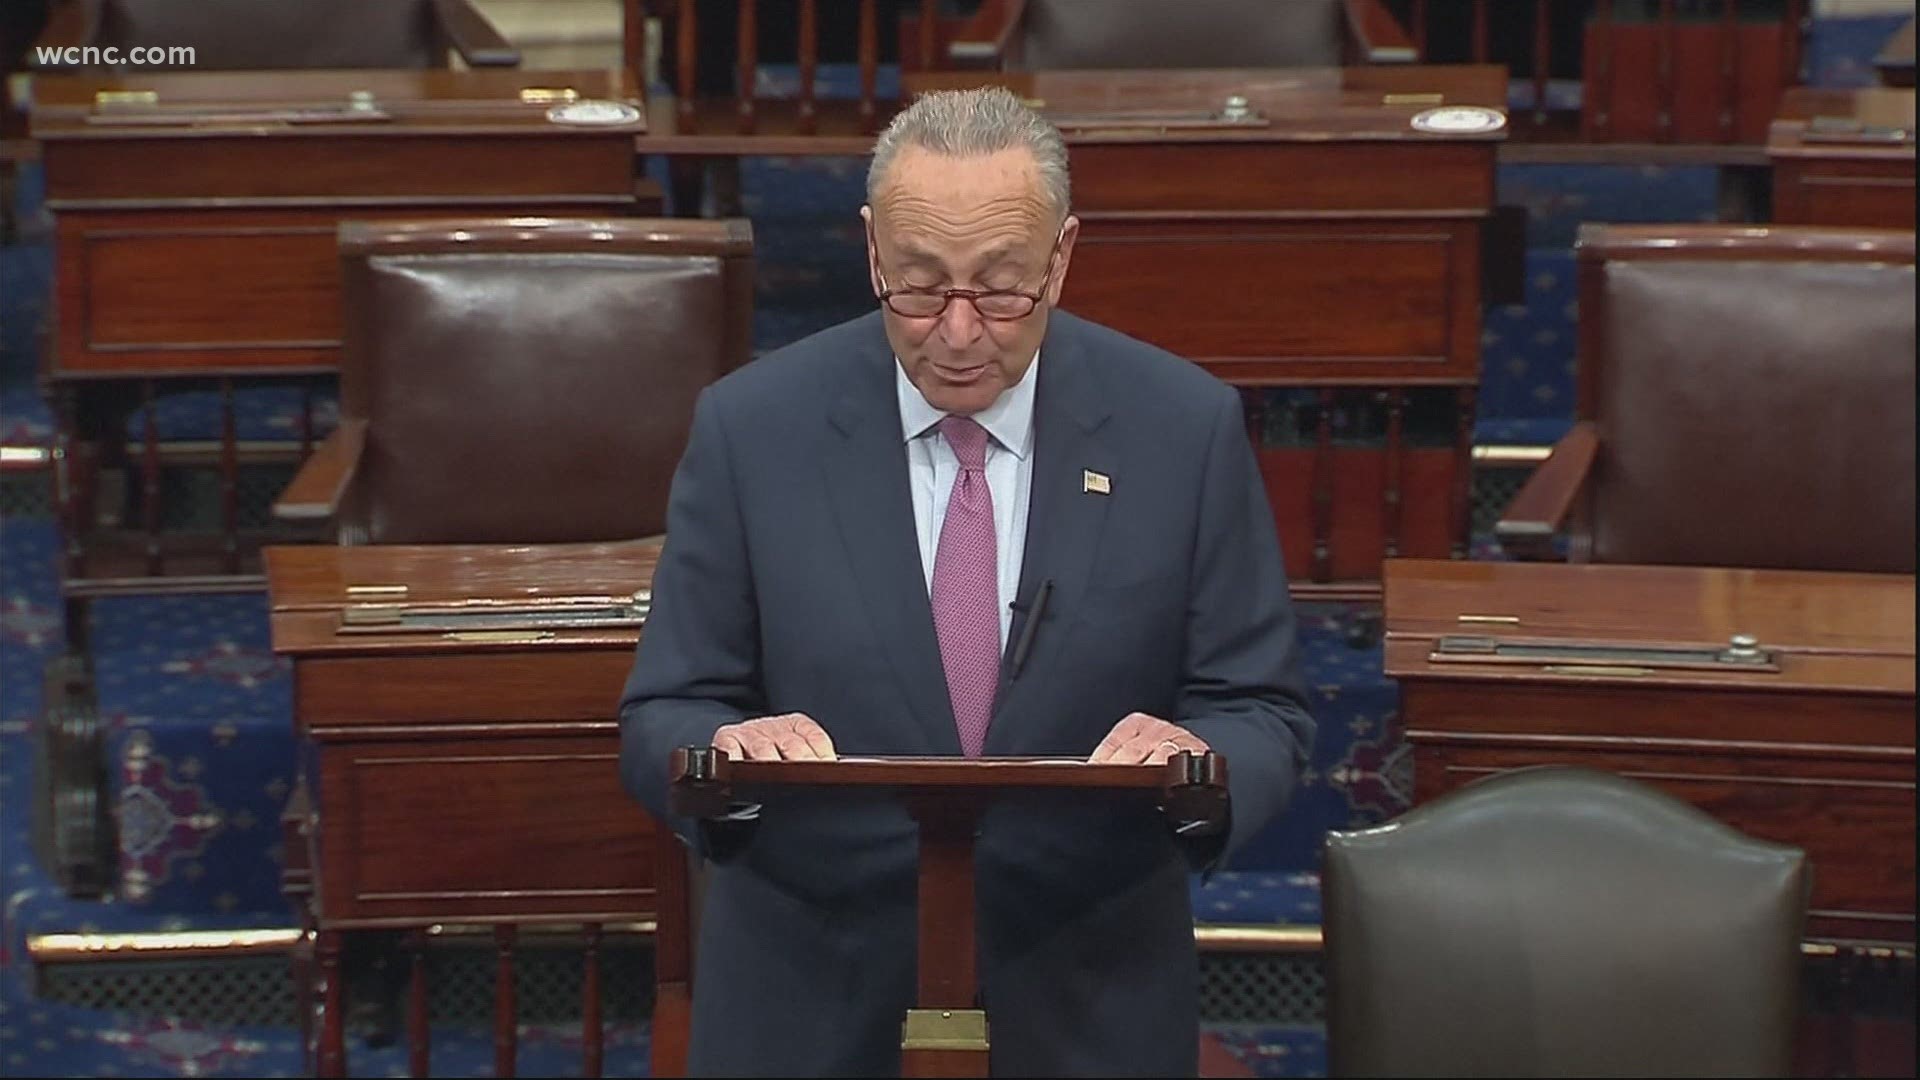 Senator Chuck Schumer mentioned the names of people who died of COVID-19.